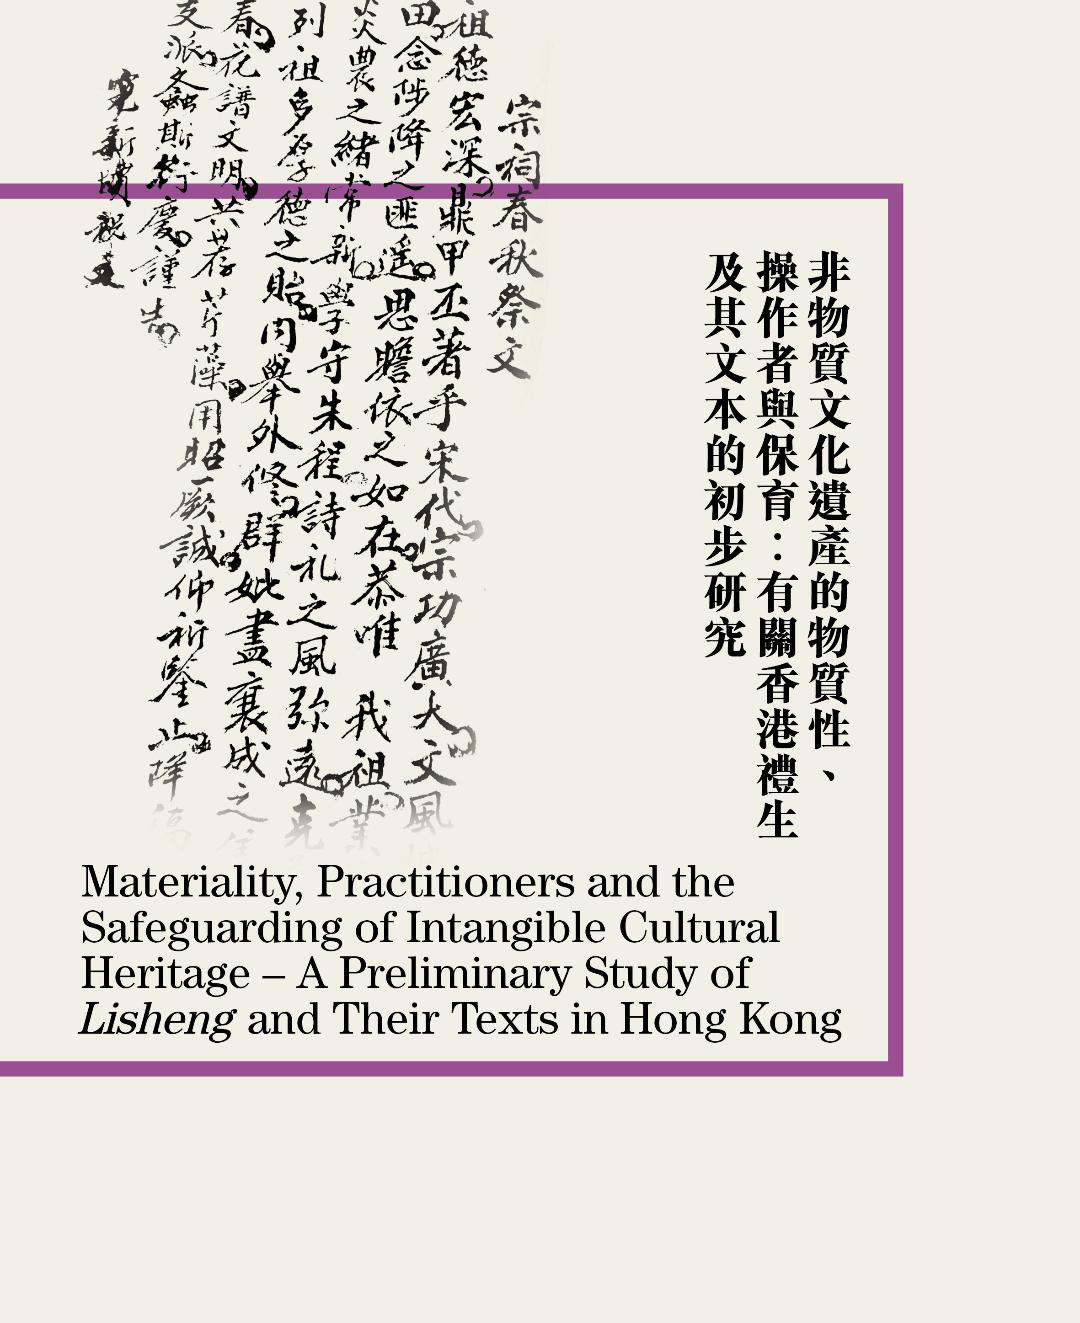 Thumbnail Materiality, Practitioners and the Safeguarding of Intangible Cultural Heritage - A Preliminary Study of Lisheng and Their Texts in Hong Kong